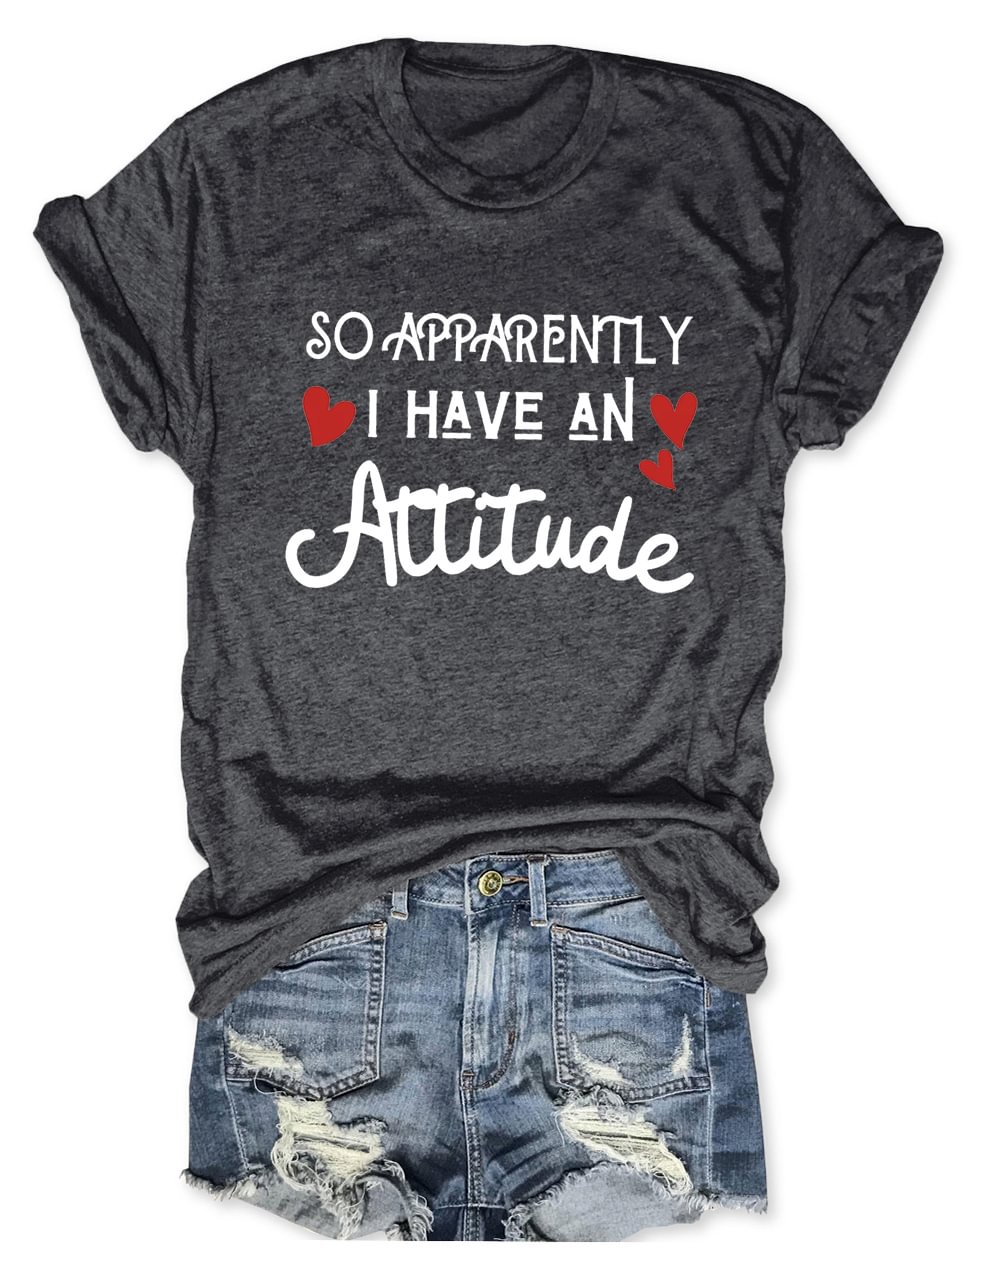 So Apparently I Have An Attitude T-Shirt